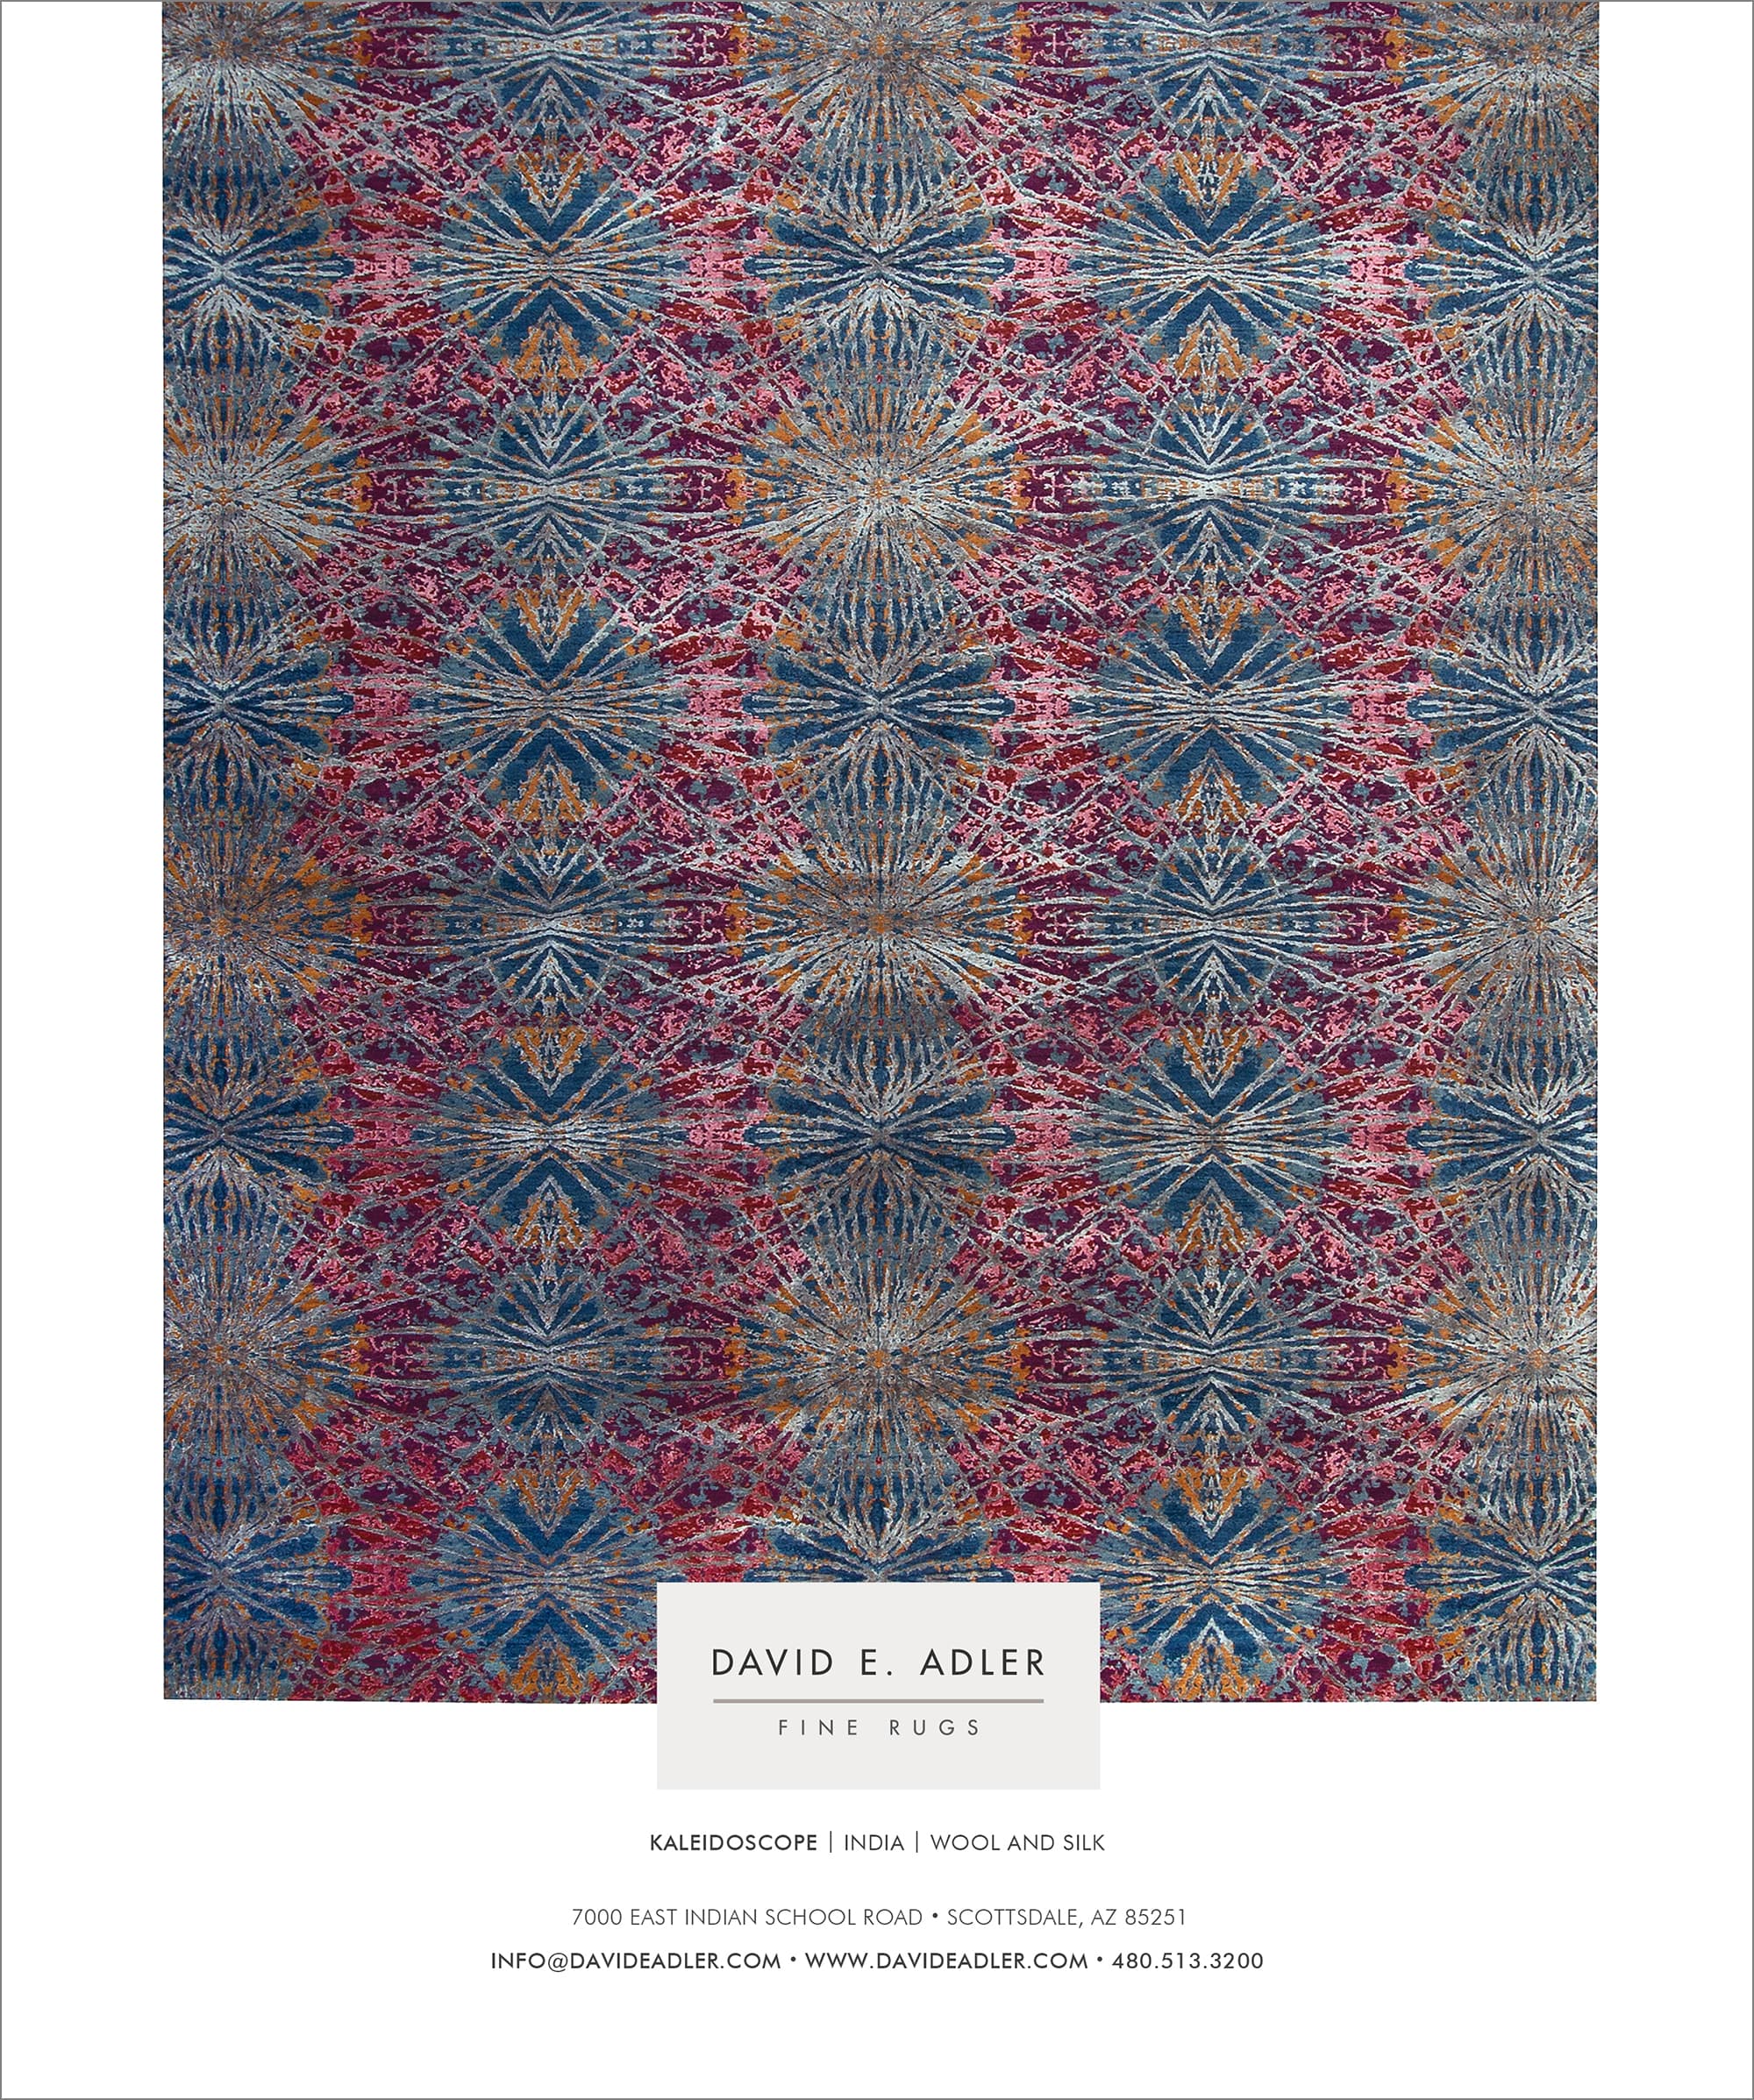 Luxe Magazine May/June 2020 Issue, David E. Adler Fine Rugs